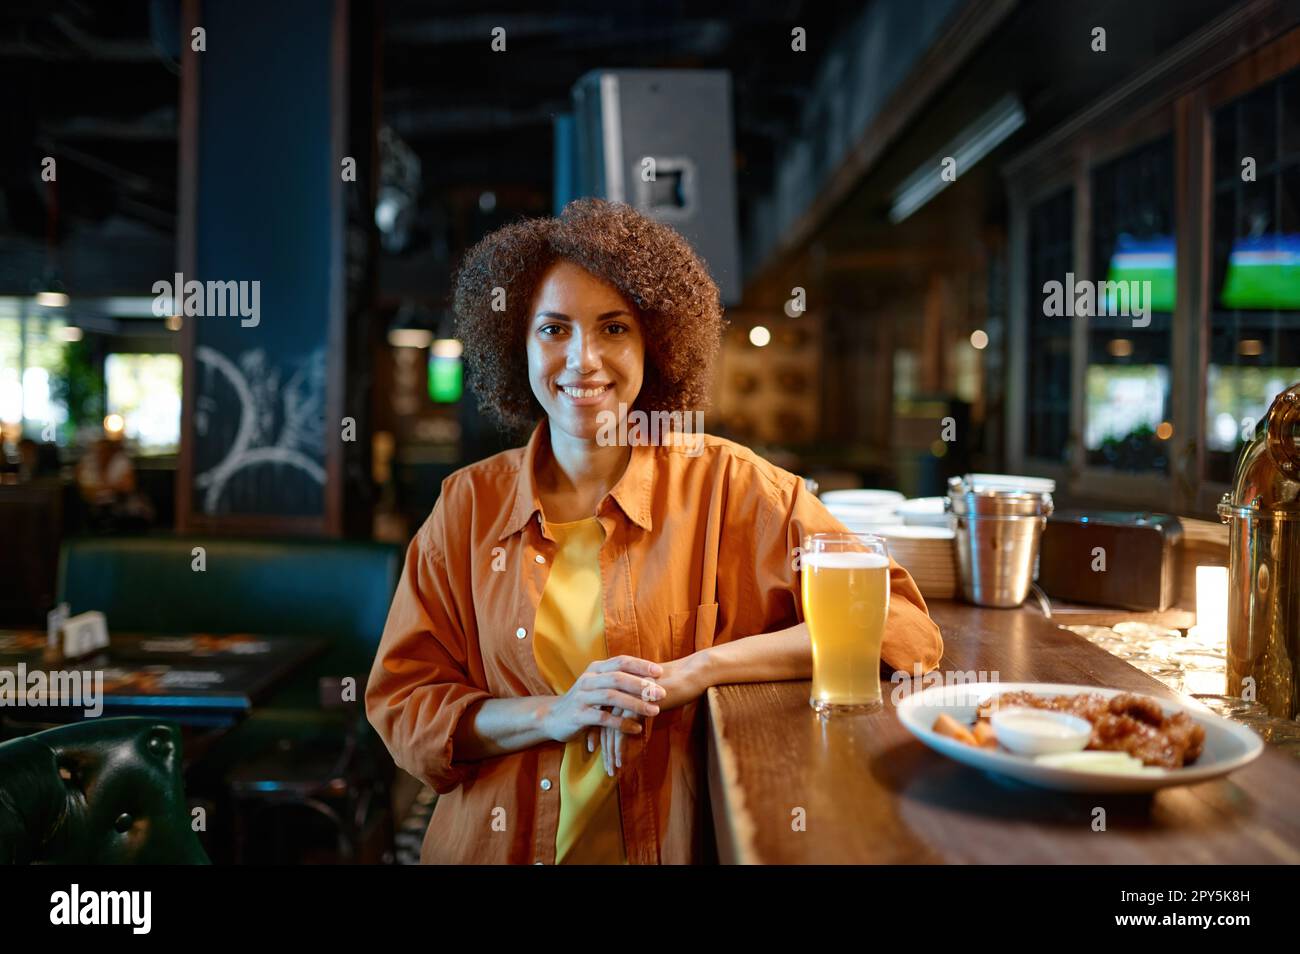 Portrait of smiling pretty woman at sports bar counter desk Stock Photo